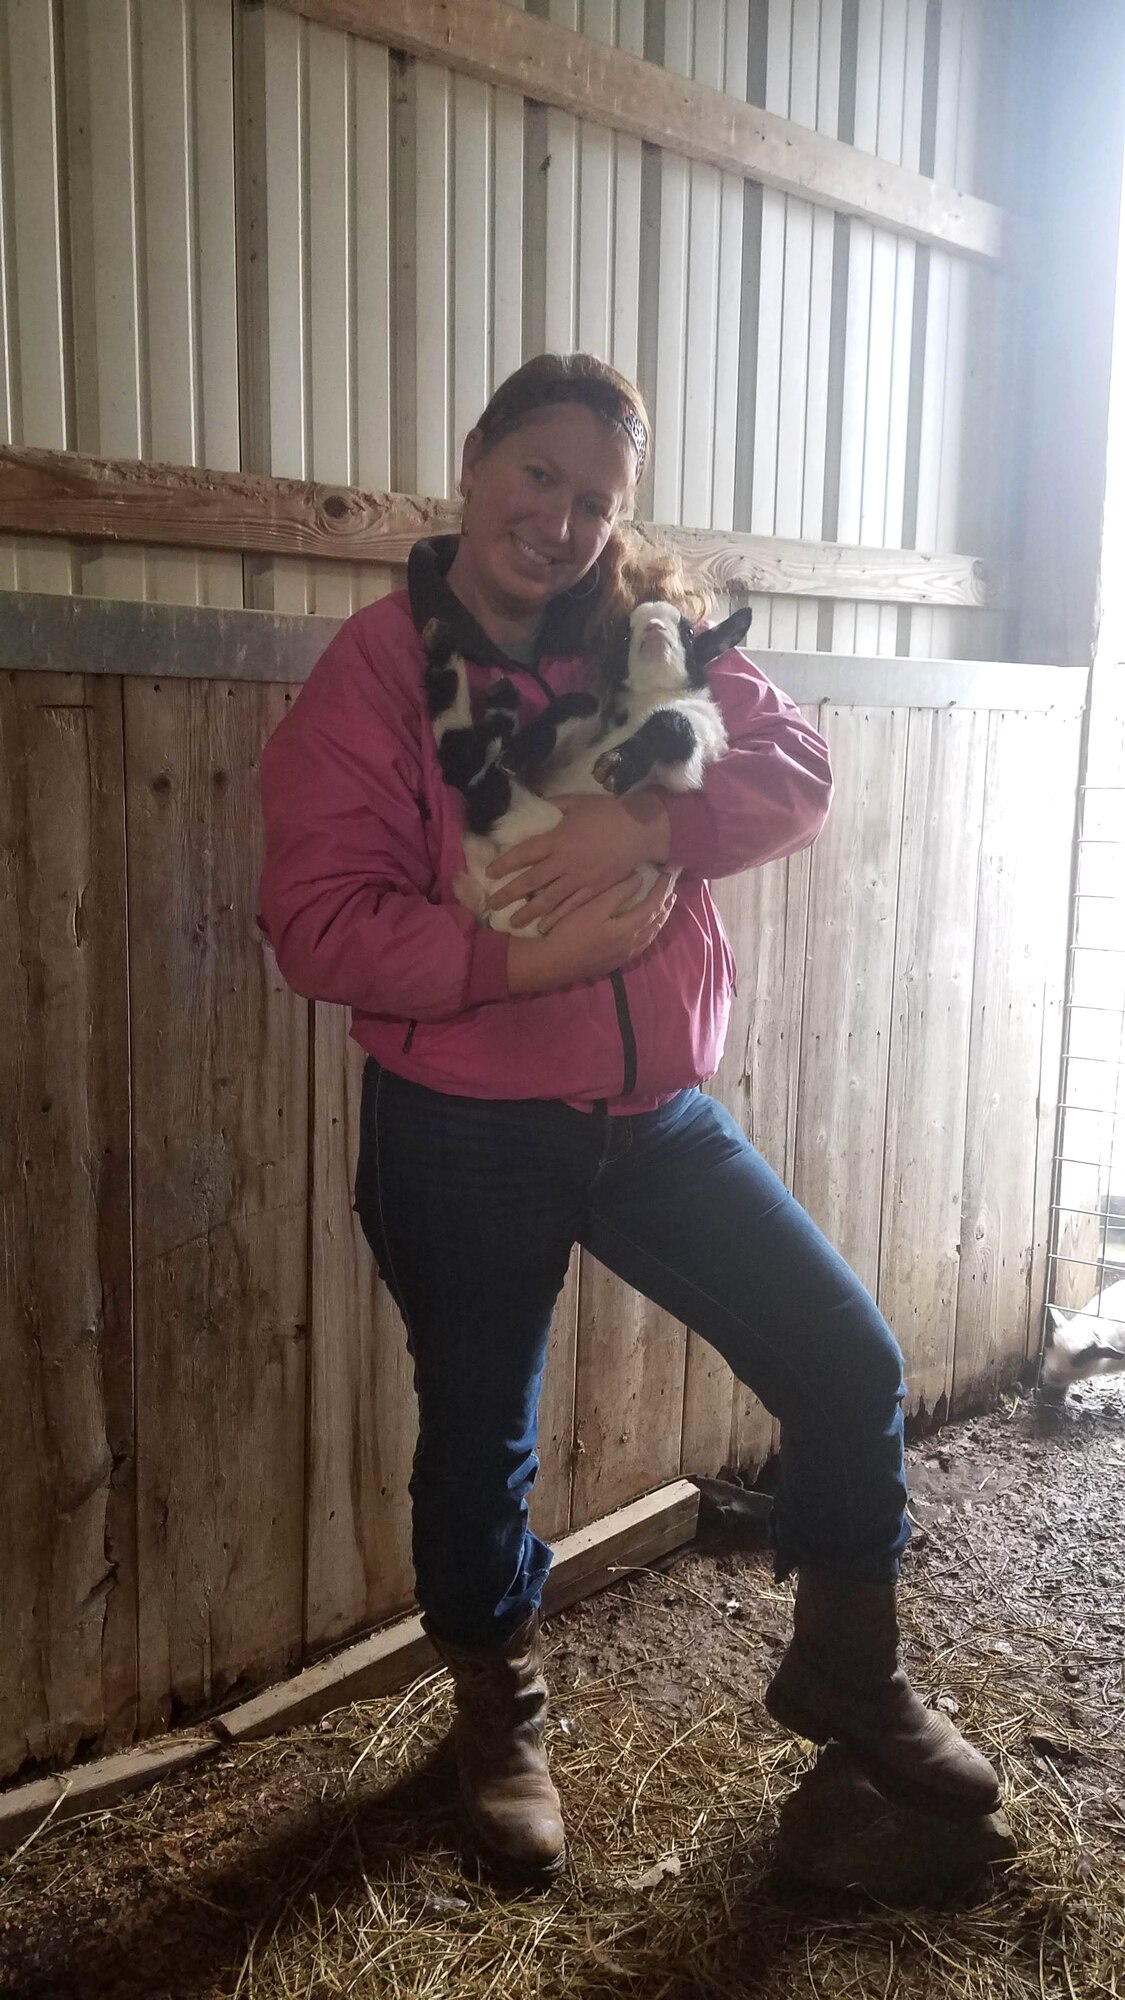 Marcy Releford, an administrative assistant for the Base Operations and Support Branch at Arnold Air Force Base, holds one of the 20 Nigerian dwarf goats she cares for on her 7.5-acre farm in Morrison, Tenn. In addition to goats, Releford also raises bantam Cochin chickens. (Courtesy photo)